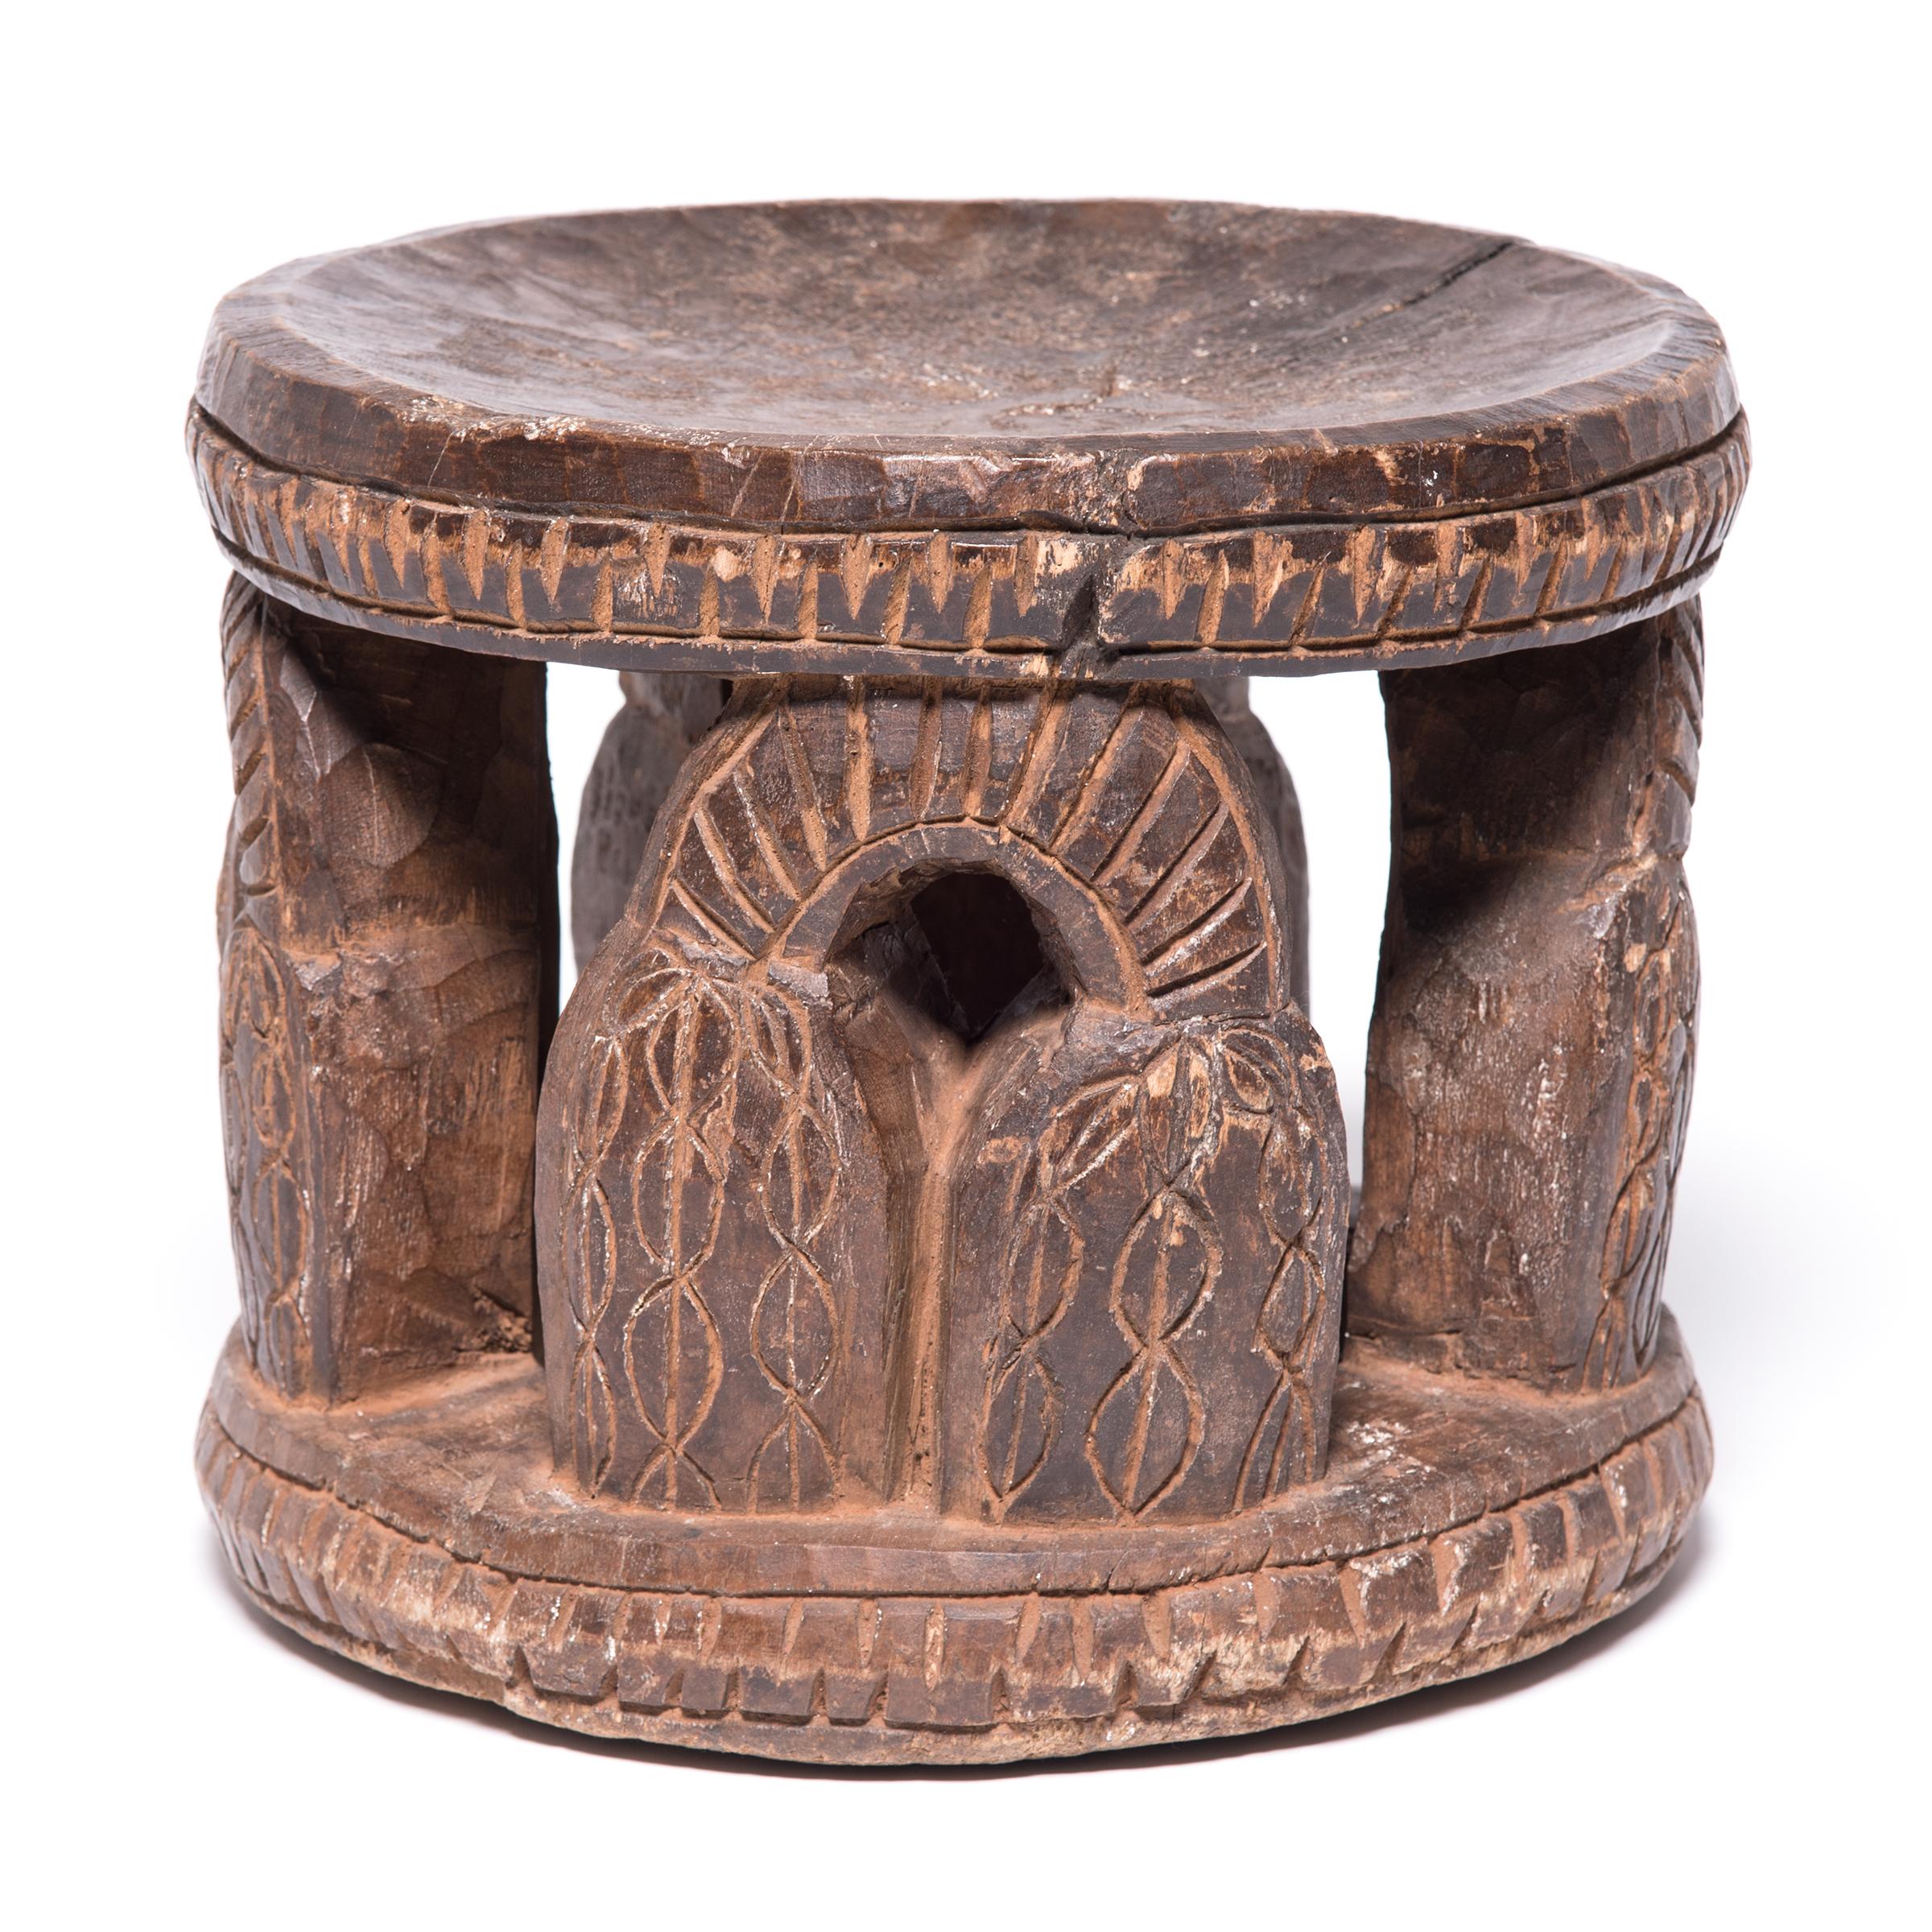 Marked by the telltale Bamileke rounded disc seat and base, this stool is supported with unexpected carvings of currency bells. Carved out of a single tree trunk, the bells both decorate and support the seated individual. The double bells were